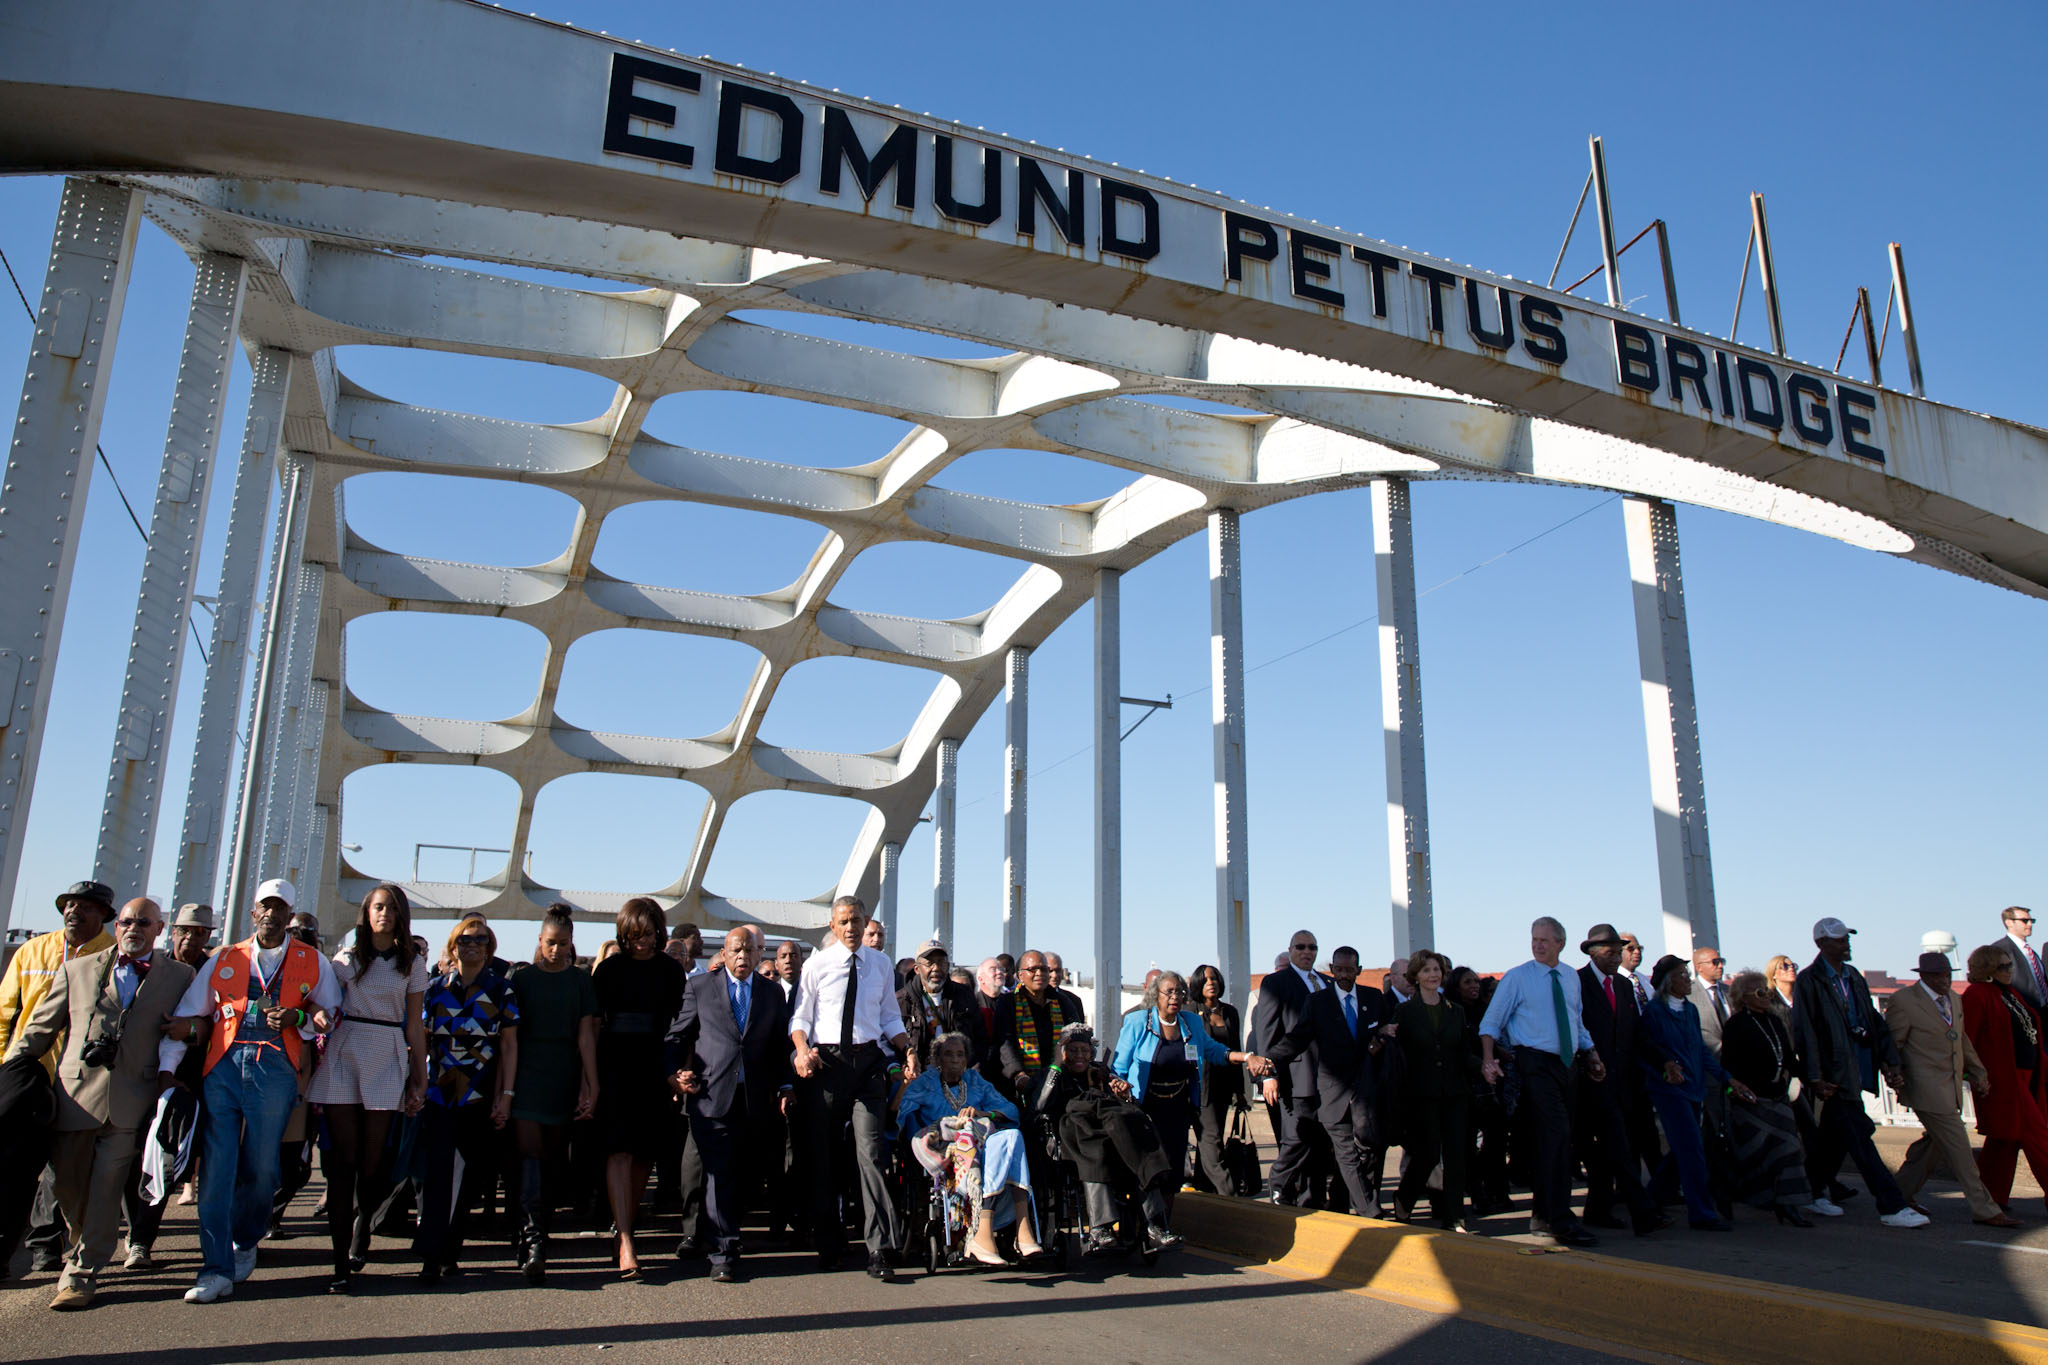 The First Family joins Rep. John Lewis, former President George W. Bush and former First Lady Laura Bush during a walk across Edmund Pettus Bridge